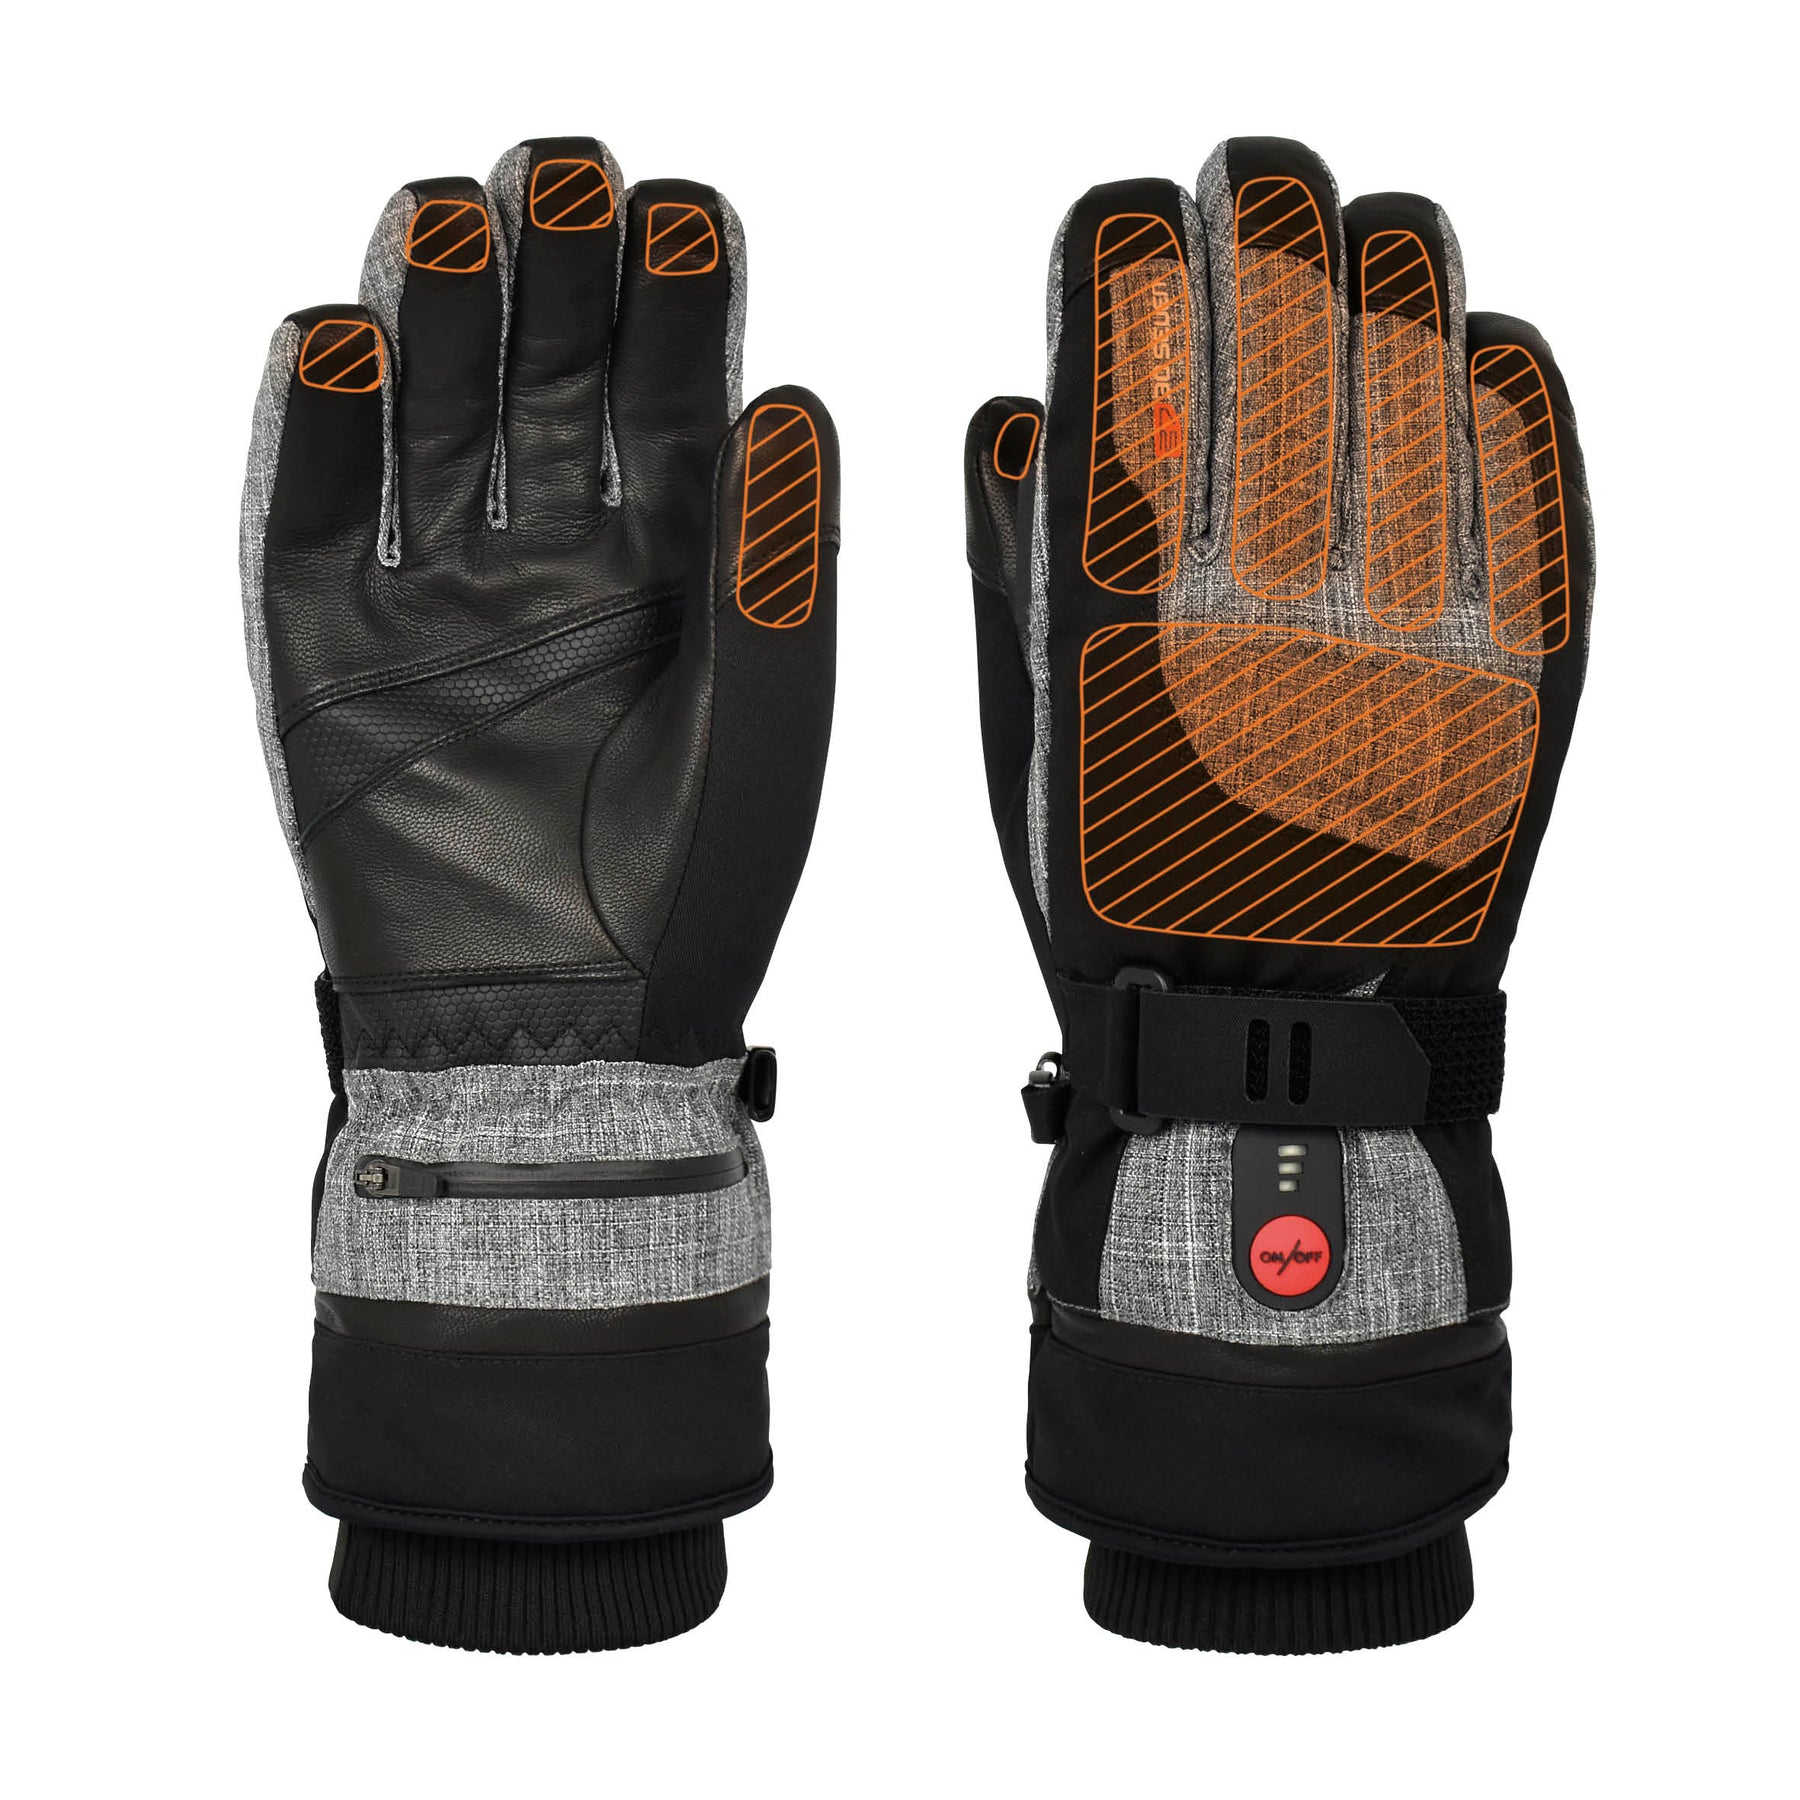 Thinsulate Comfort Heated Gloves - Stay Warm Without Sacrificing Mobility  This Winter – 30seven